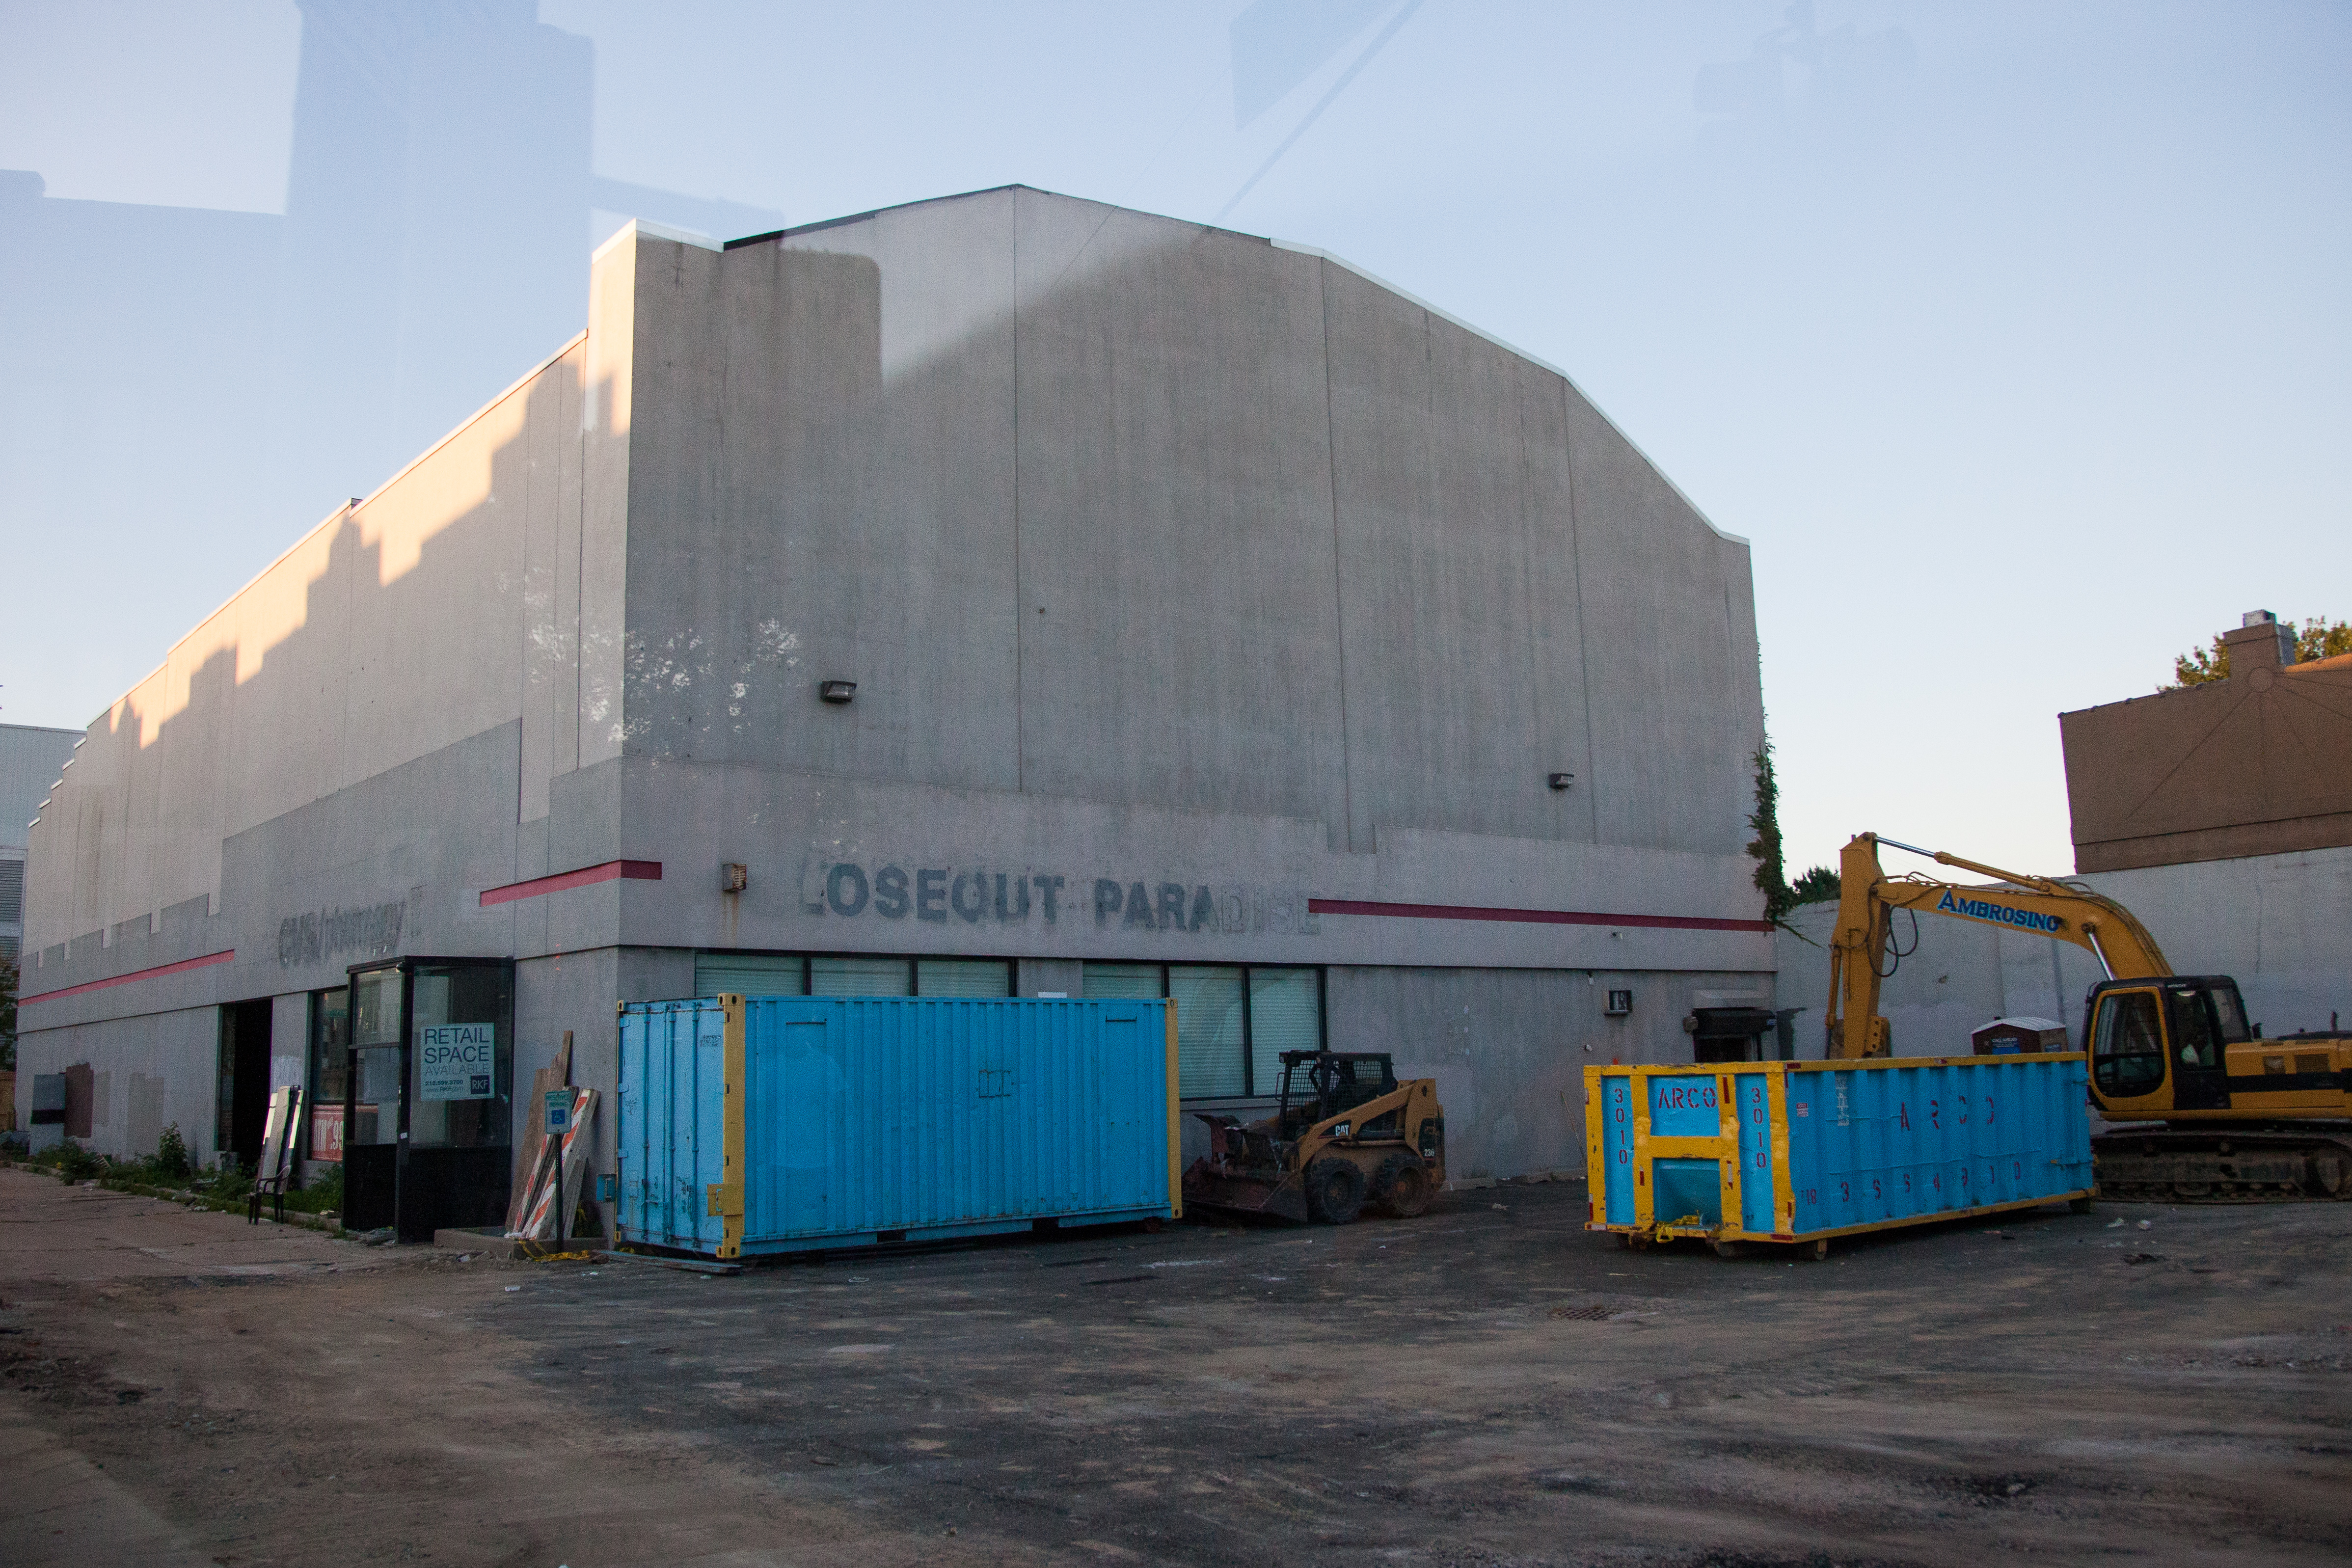 Construction To Expand Building Begins At The Vacant Oasis Theater